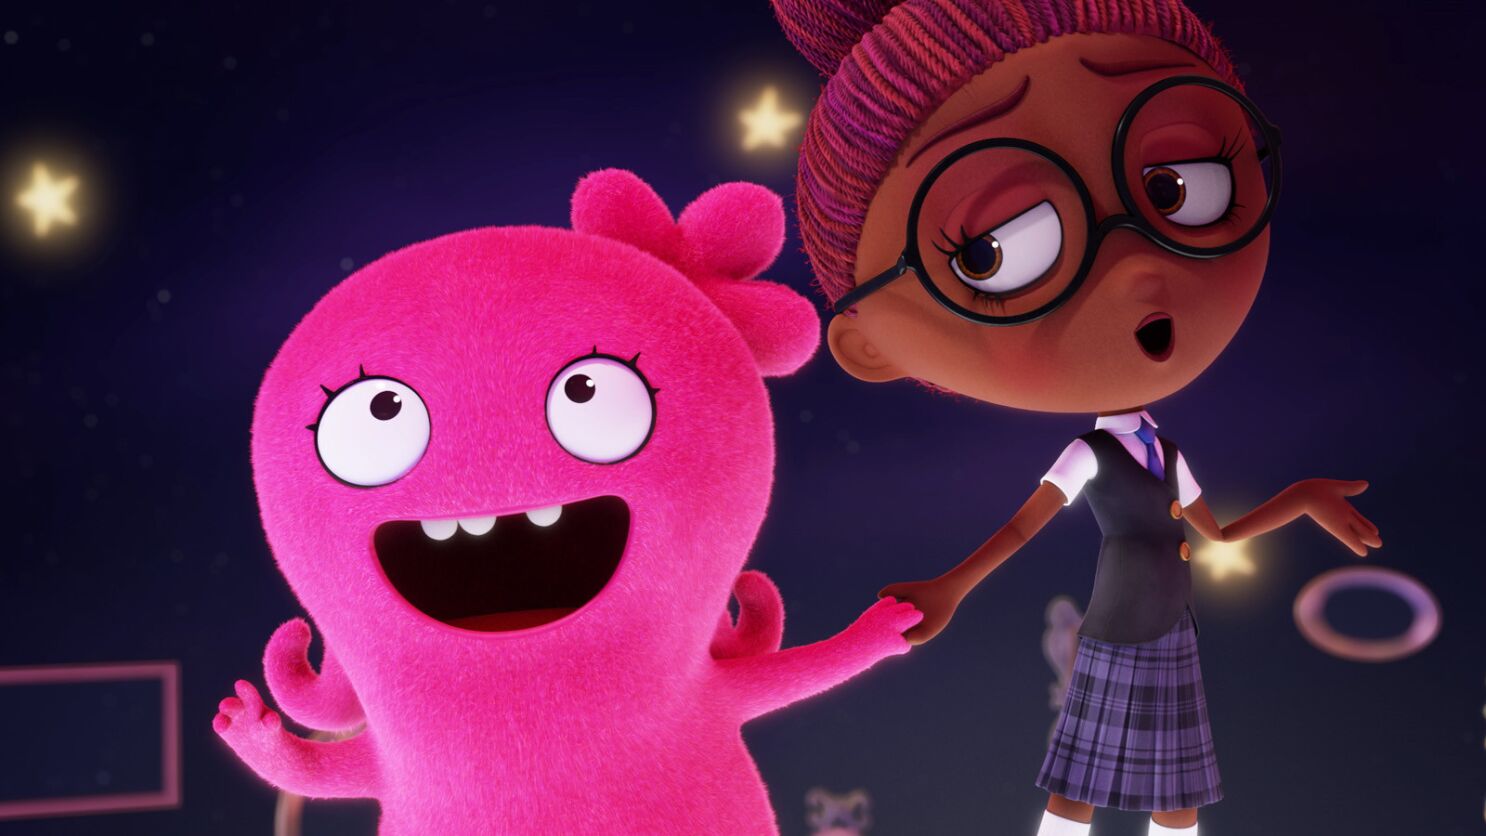 Review: Bland 'UglyDolls' is nothing more than a merchandising opportunity  - Los Angeles Times